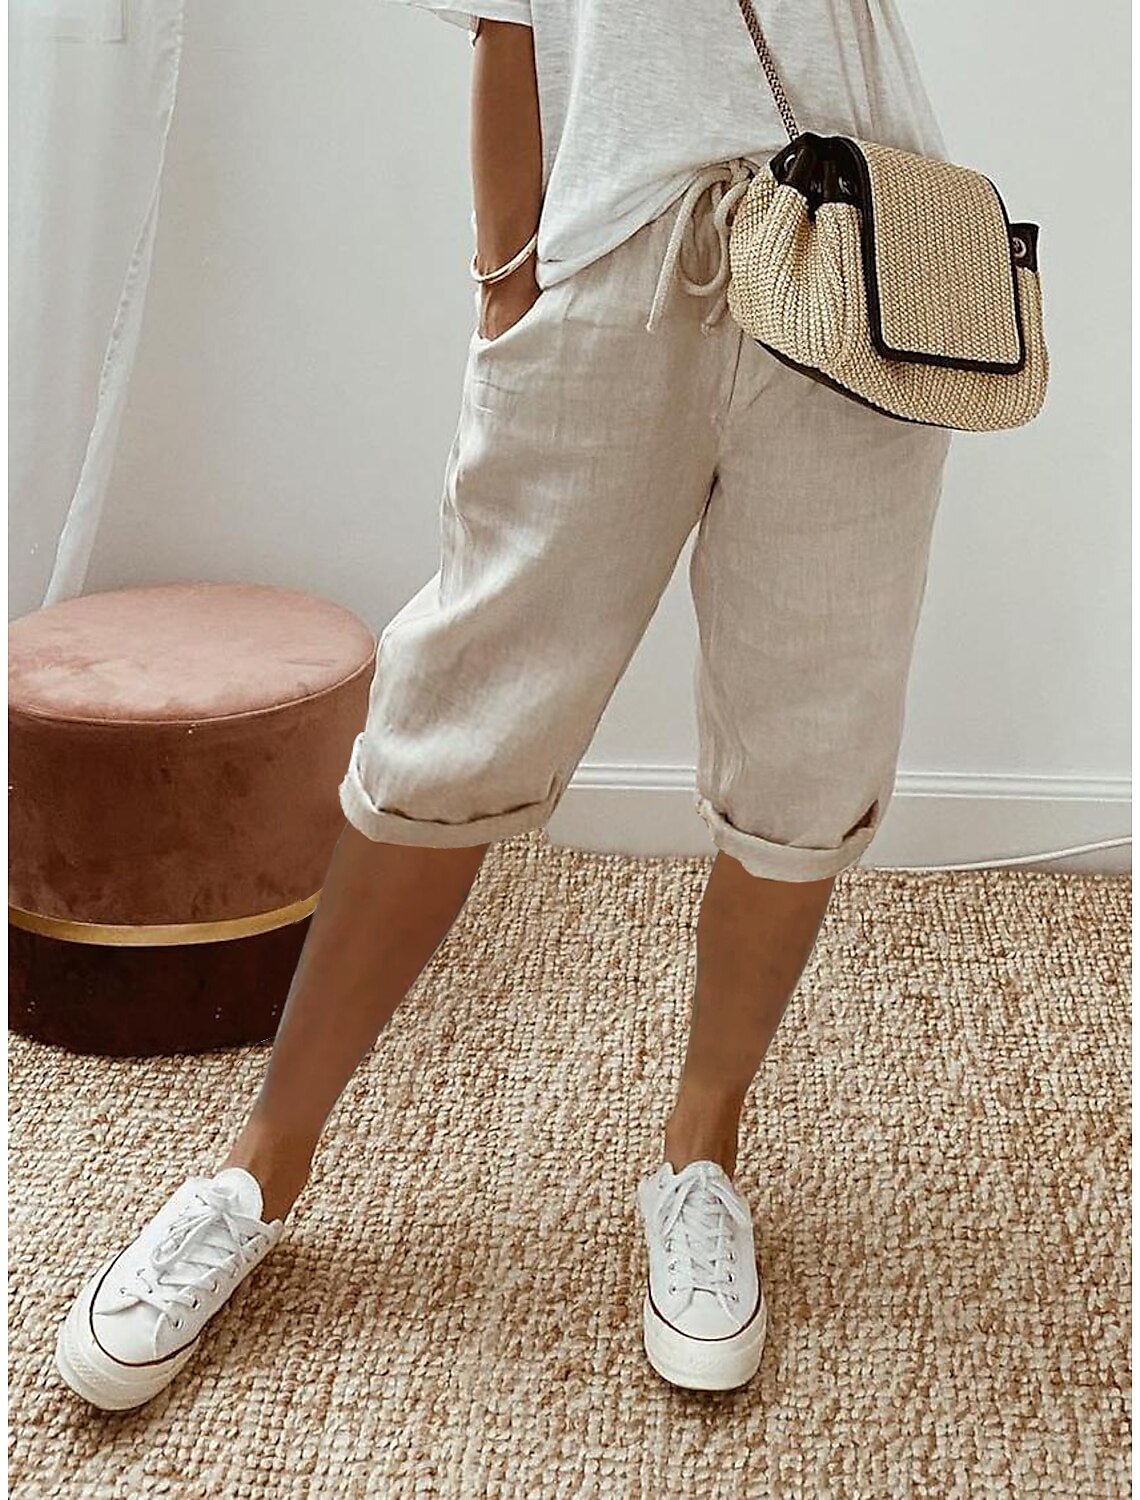 Women's Linen Pants Baggy Knee Length Pocket Baggy Vacation Casual Daily Casual Daily Wear Robin's Egg Blue White / White S M Autumn / Fall Spring & Summer 2023 - US $16.99 –P1